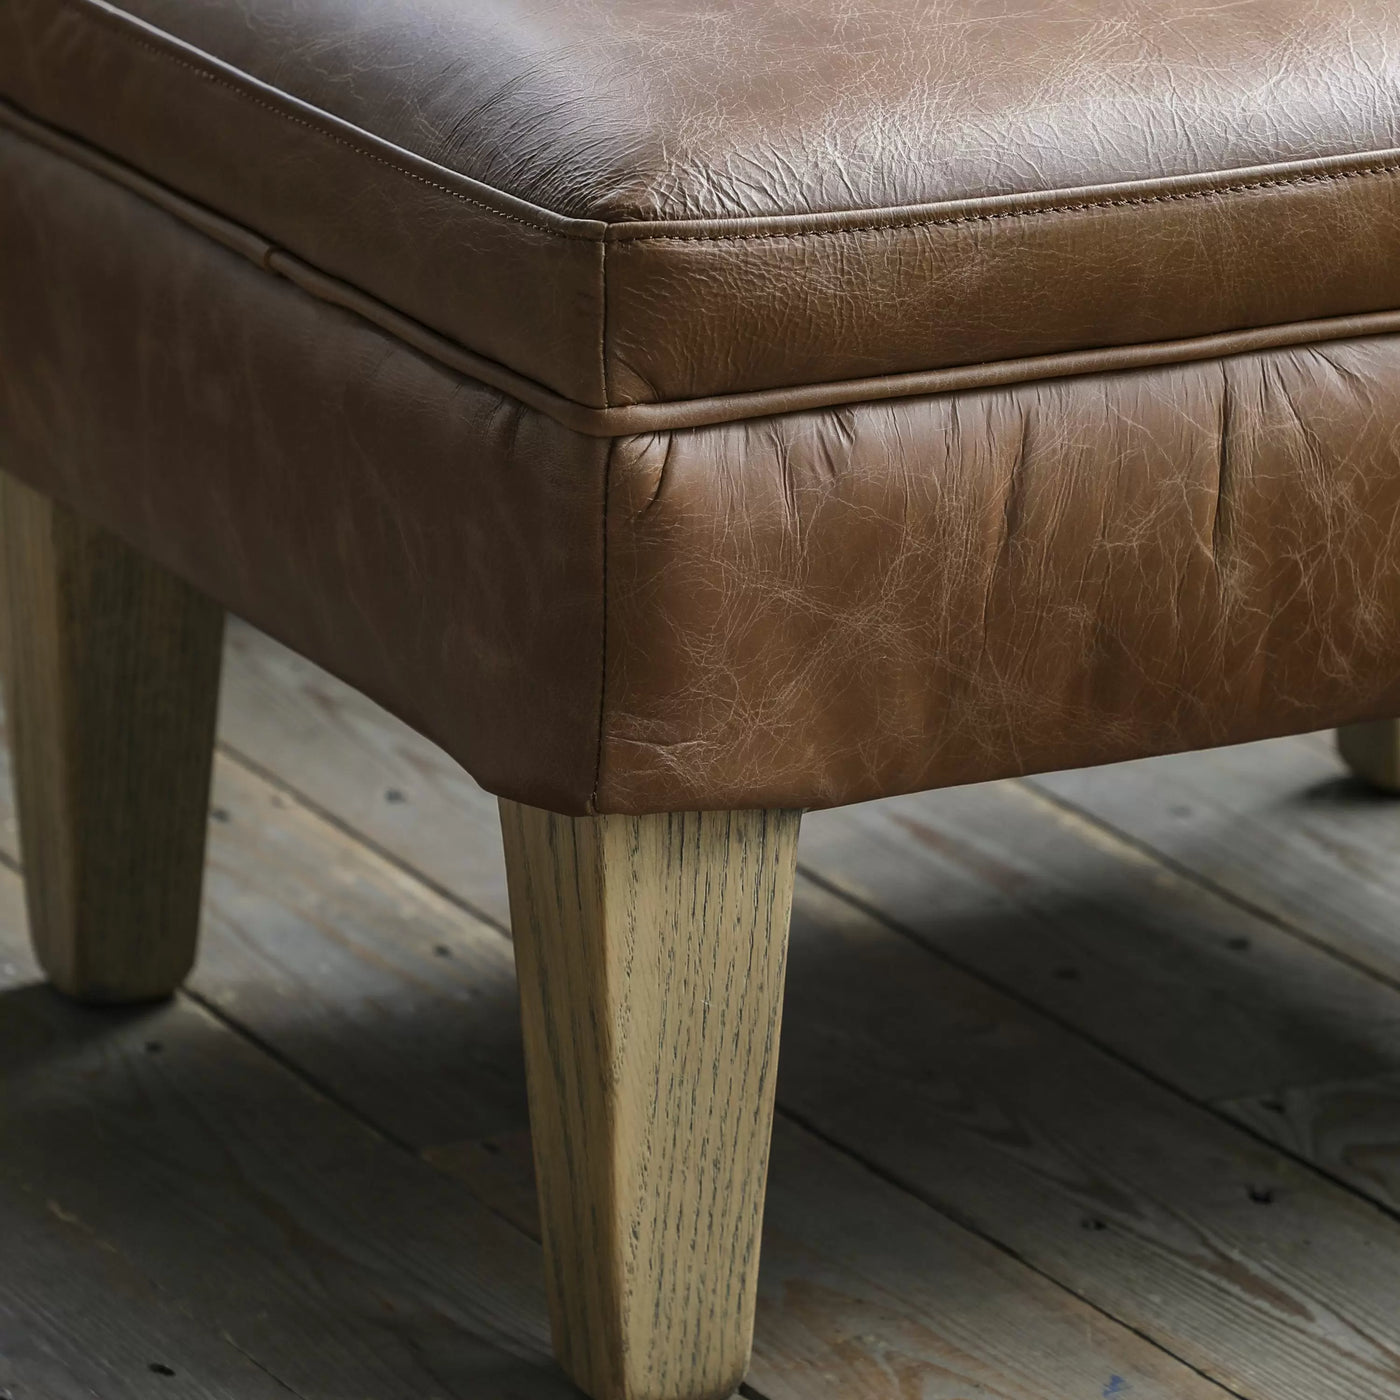 Dufftown Stool Vintage Brown Leather W550 x D450 x H360mm